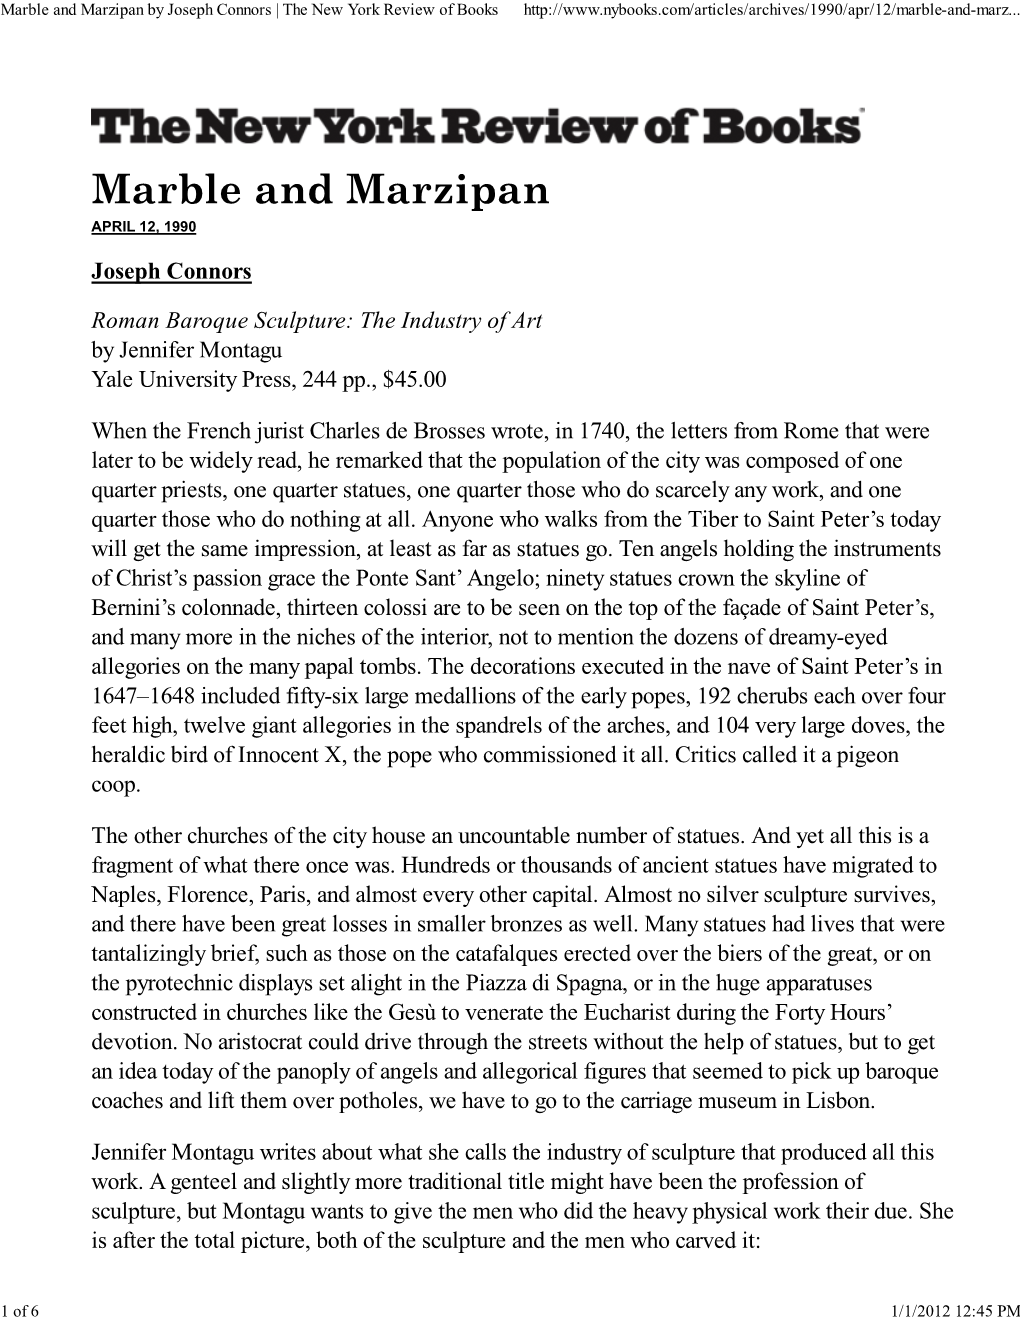 Marble and Marzipan by Joseph Connors | the New York Review of Books